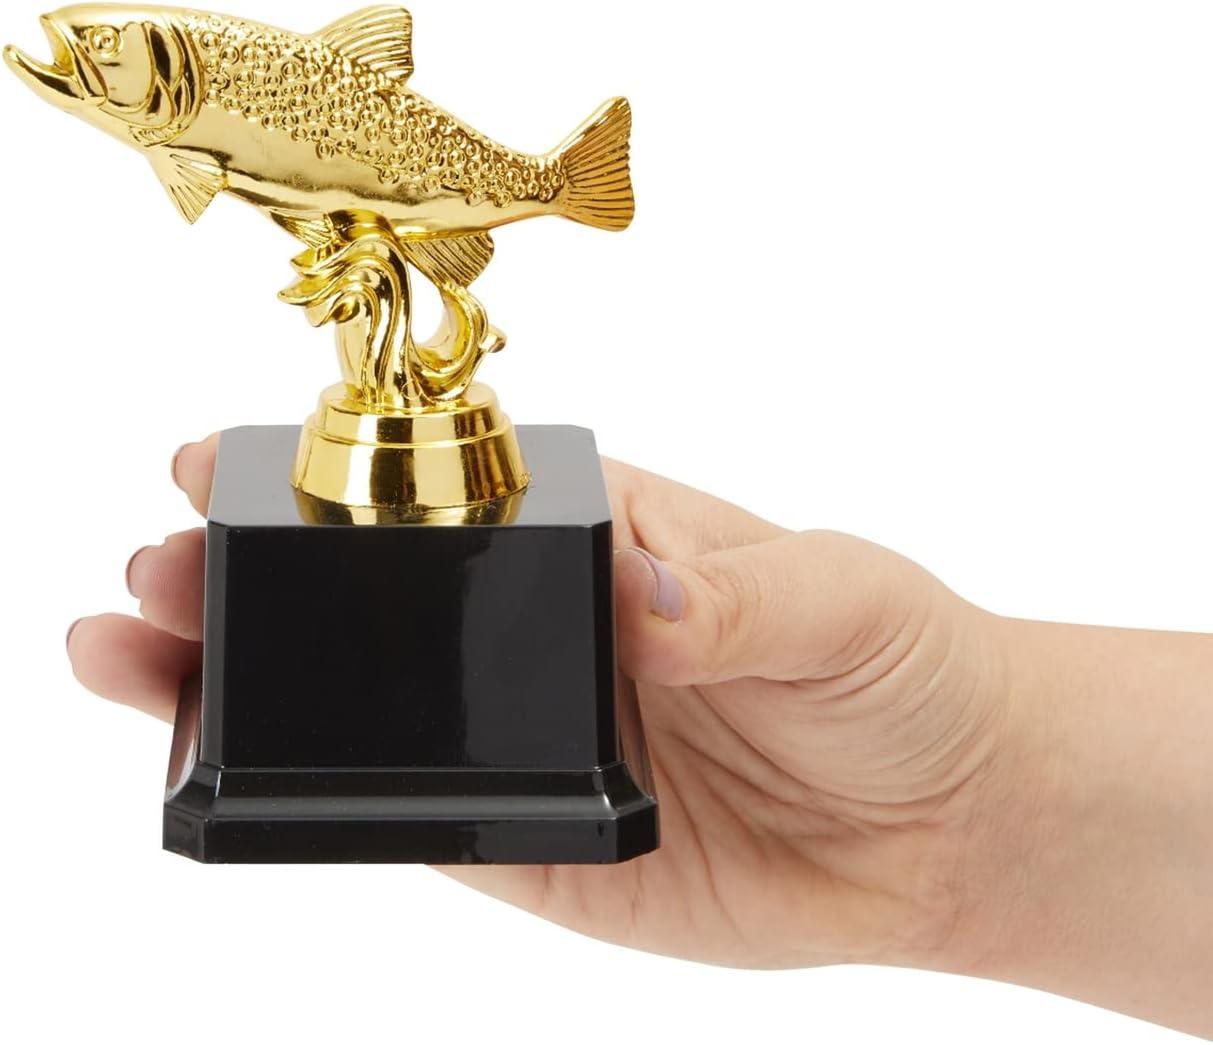 Juvale Small Fishing Trophy Award for Ceremonies, Tournaments,  Competitions, and Fish Derbies, Golden Fish Trophy for Both Kids and  Adults, Funny and Unique Gift (3x5 in)